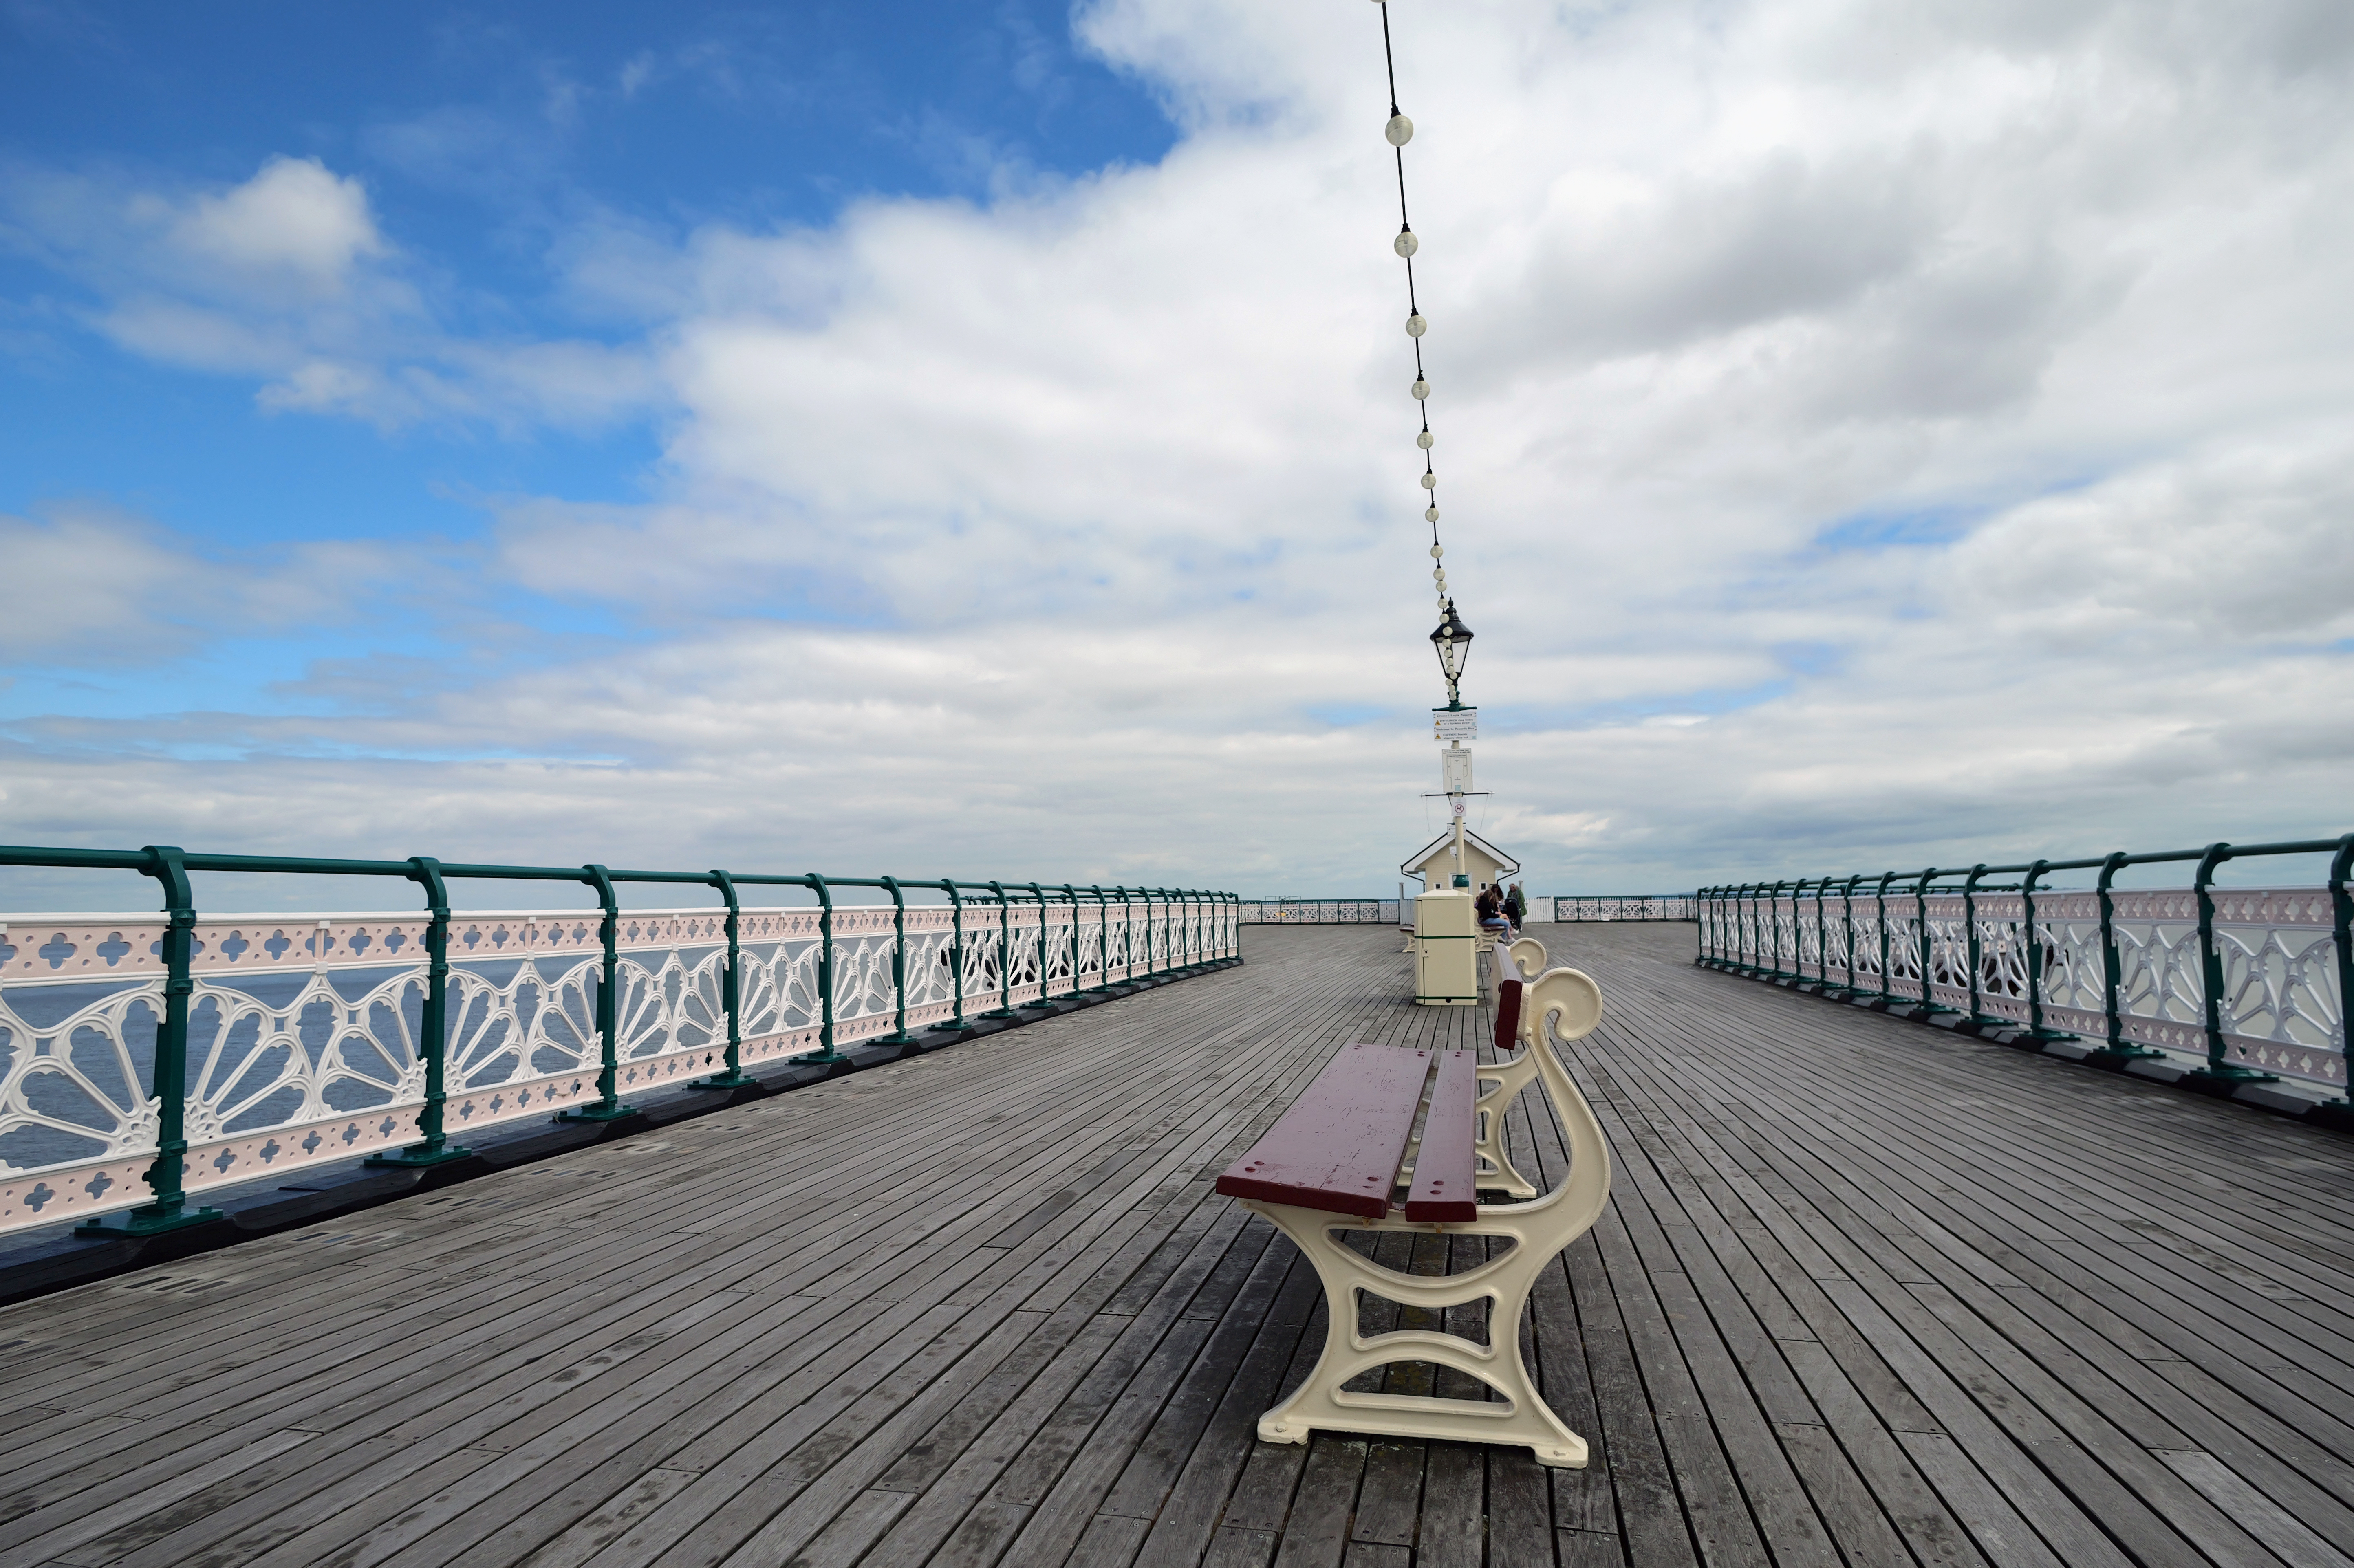 On the pier, 1/2000s, f/4, ISO100, 9mm, Panasonic Lumix GH6, Levels adjusted, Amy Davies